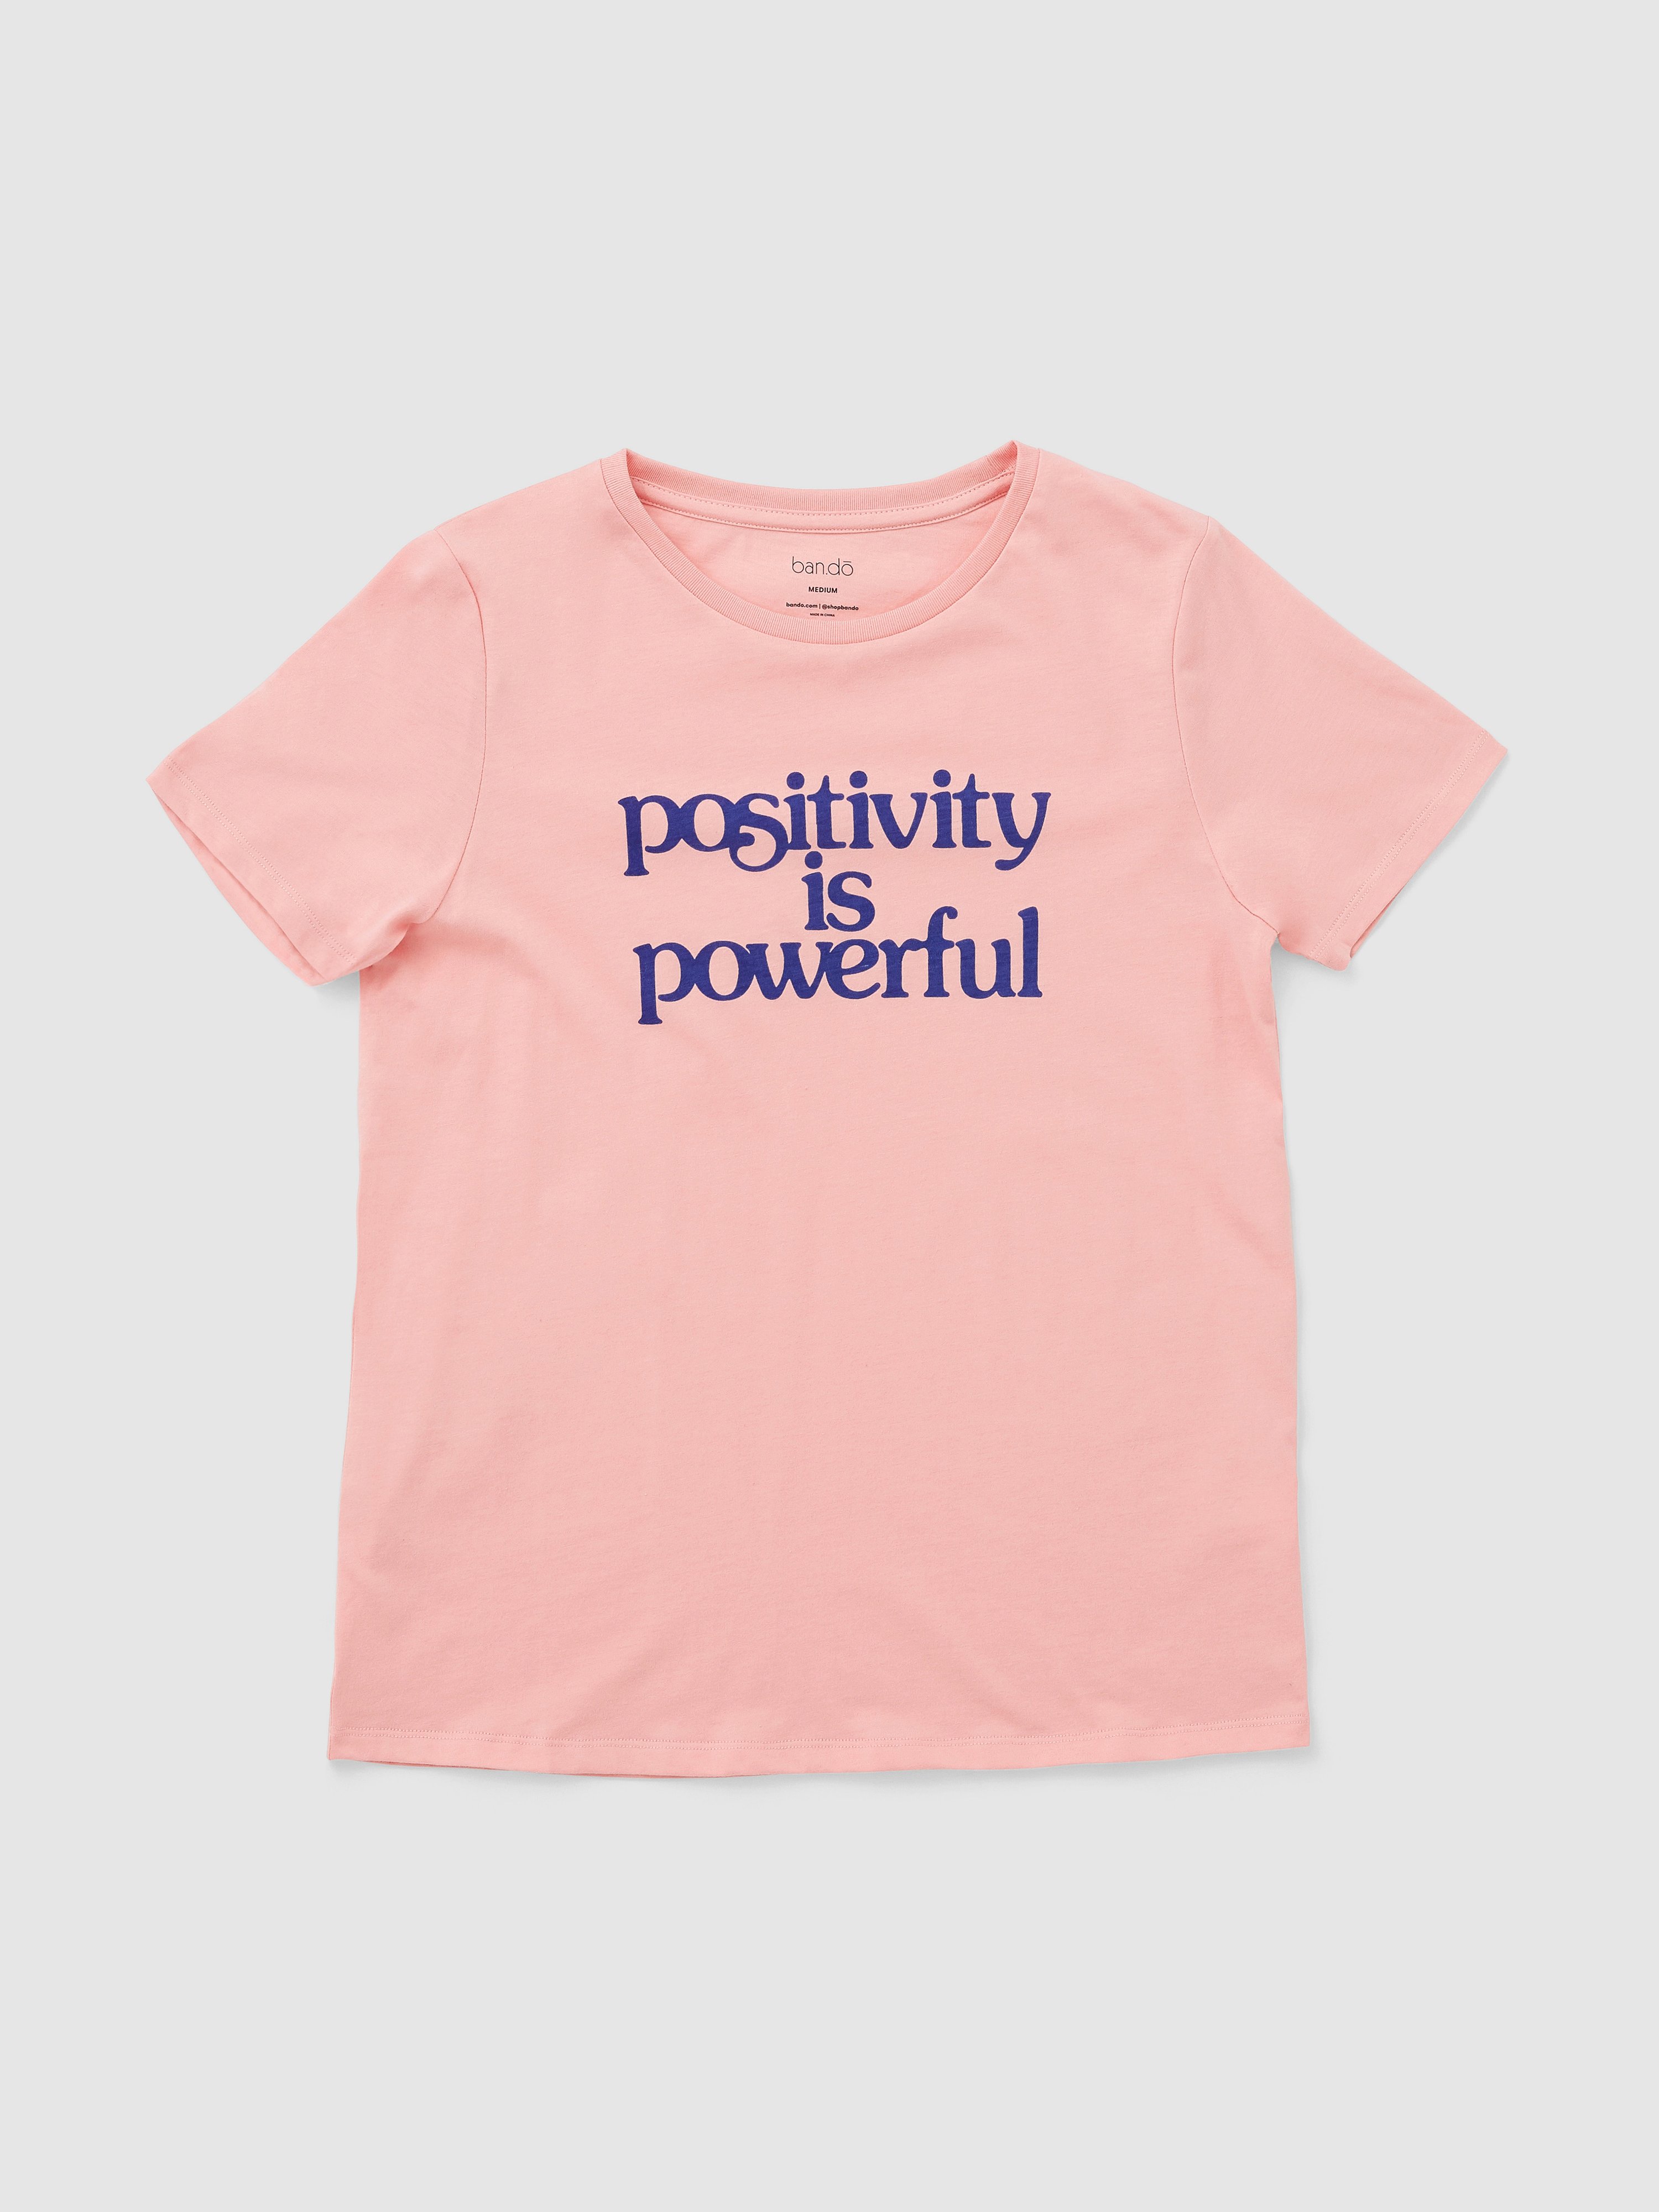 Bando Ban.do Positivity Is Powerful Tee In Cameo Pink